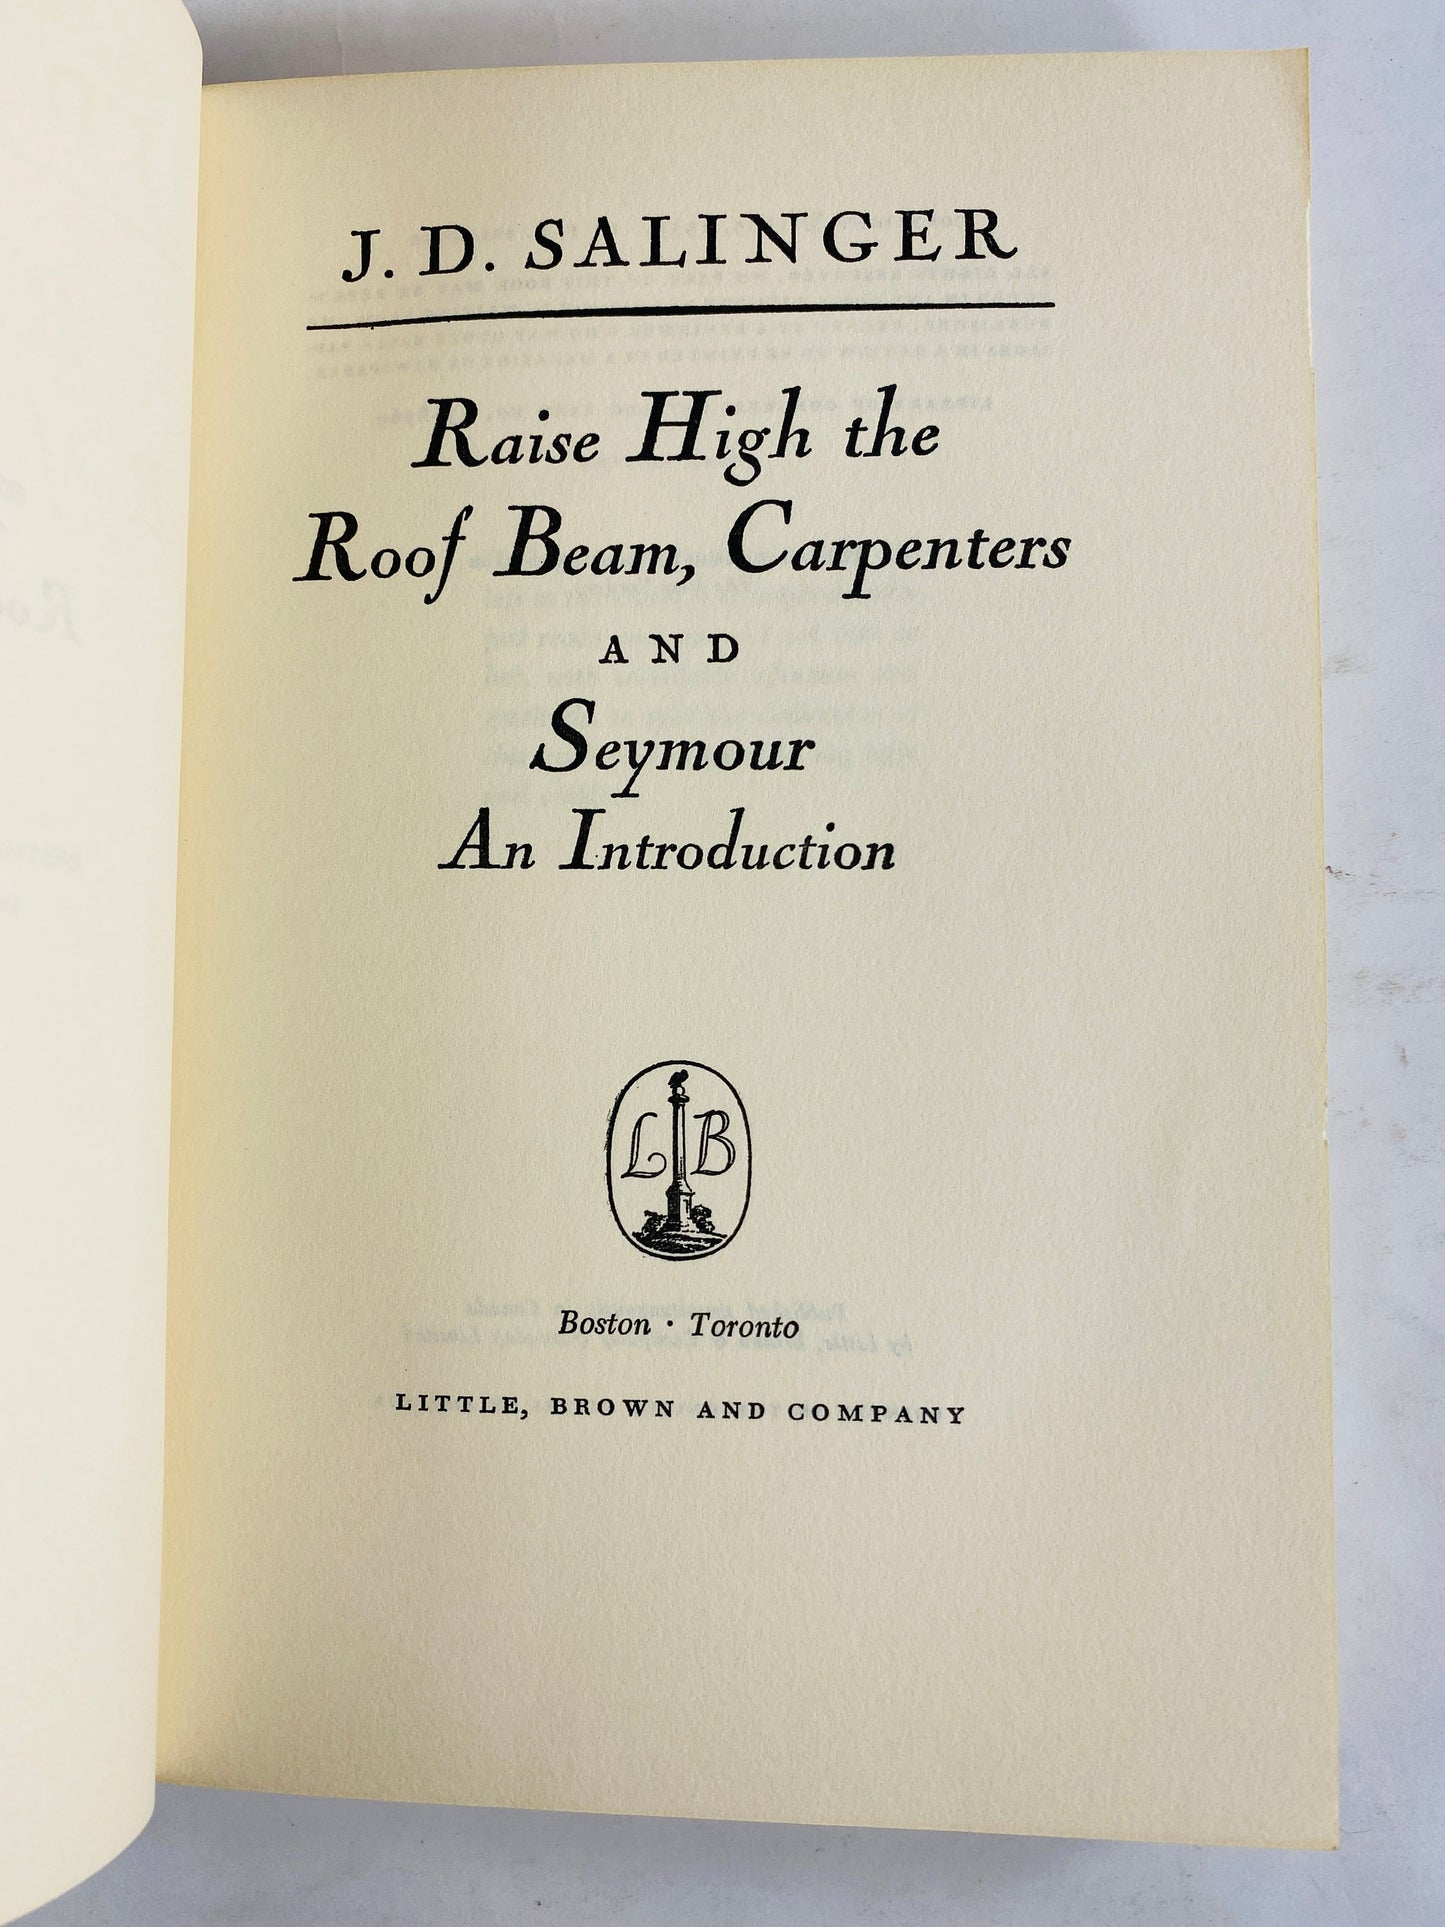 1959 Raise High the Roof Beam, Carpenters and Seymour FIRST EDITION Vintage book by JD Salinger with dust jacket circa 1959.